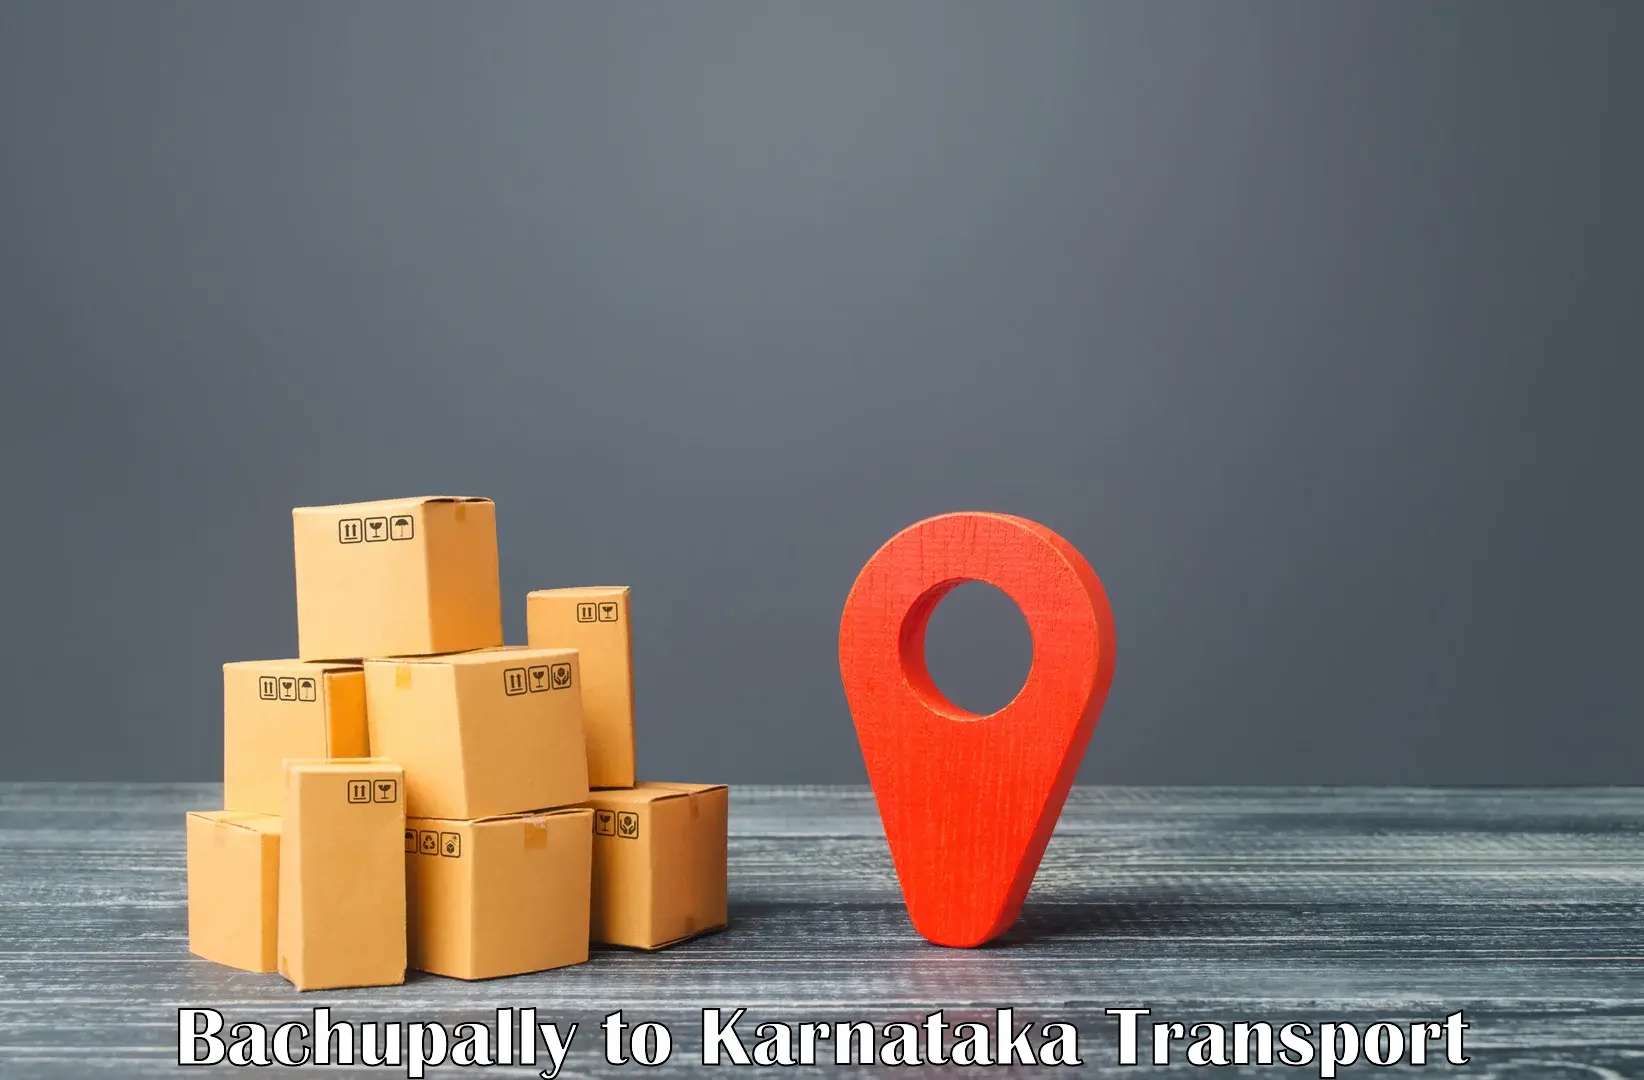 Express transport services Bachupally to Channapatna